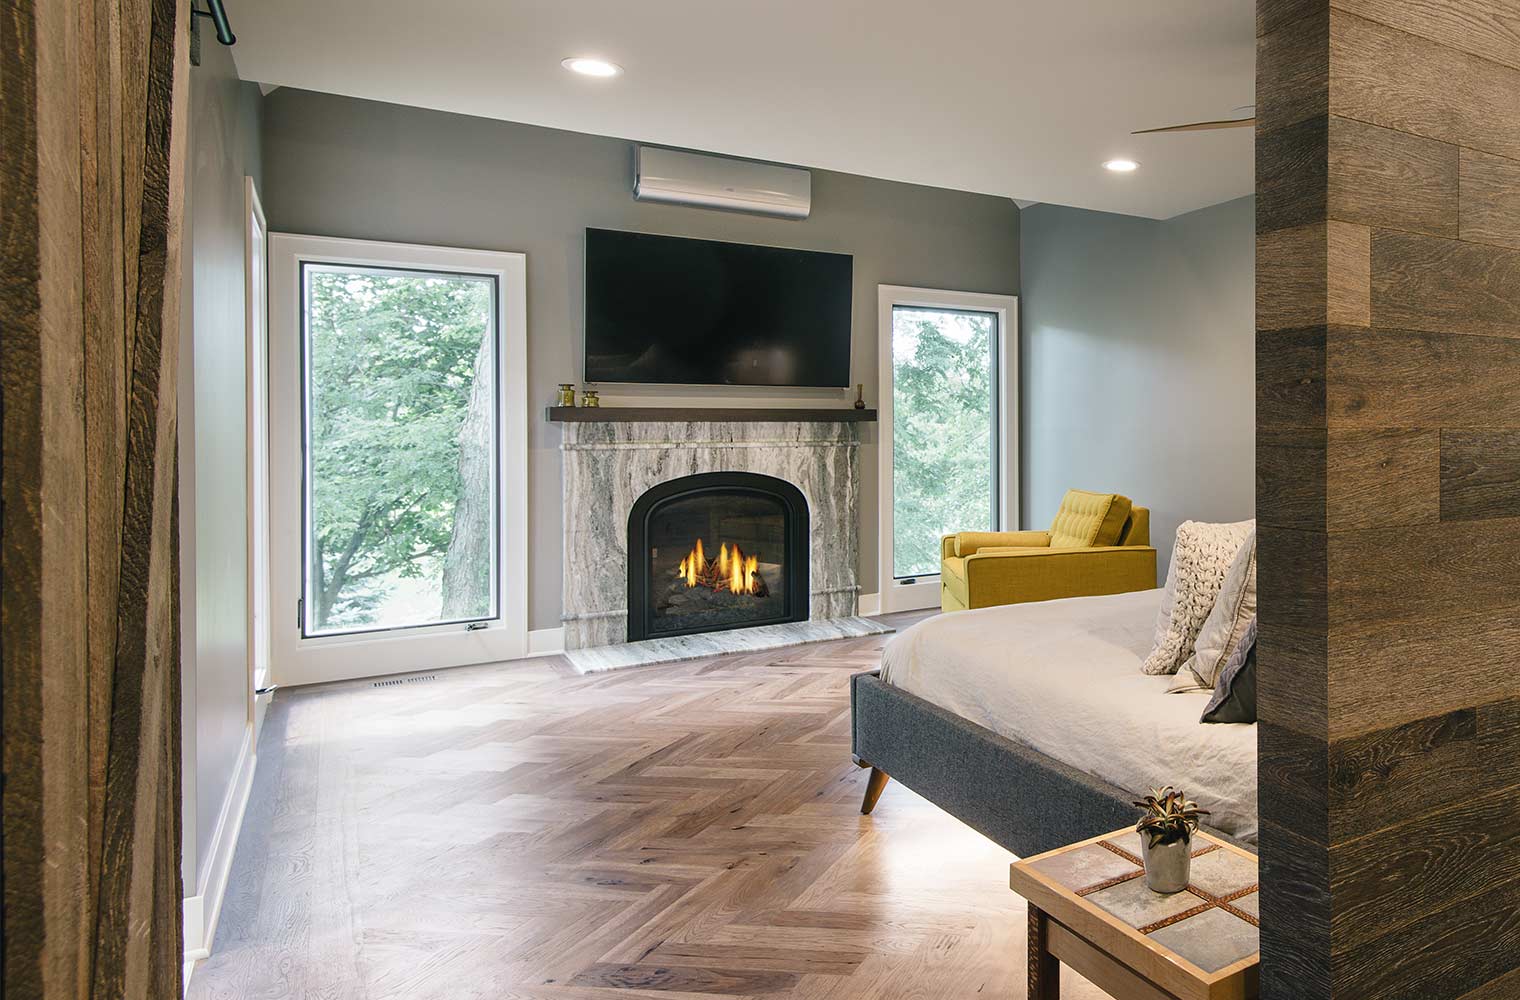 contemporary master suite features three way mirror, gas fireplace, marble mantel, tall casement windows, herringbone oiled floor by designer and remodeler Silent Rivers of Des Moines, Iowa